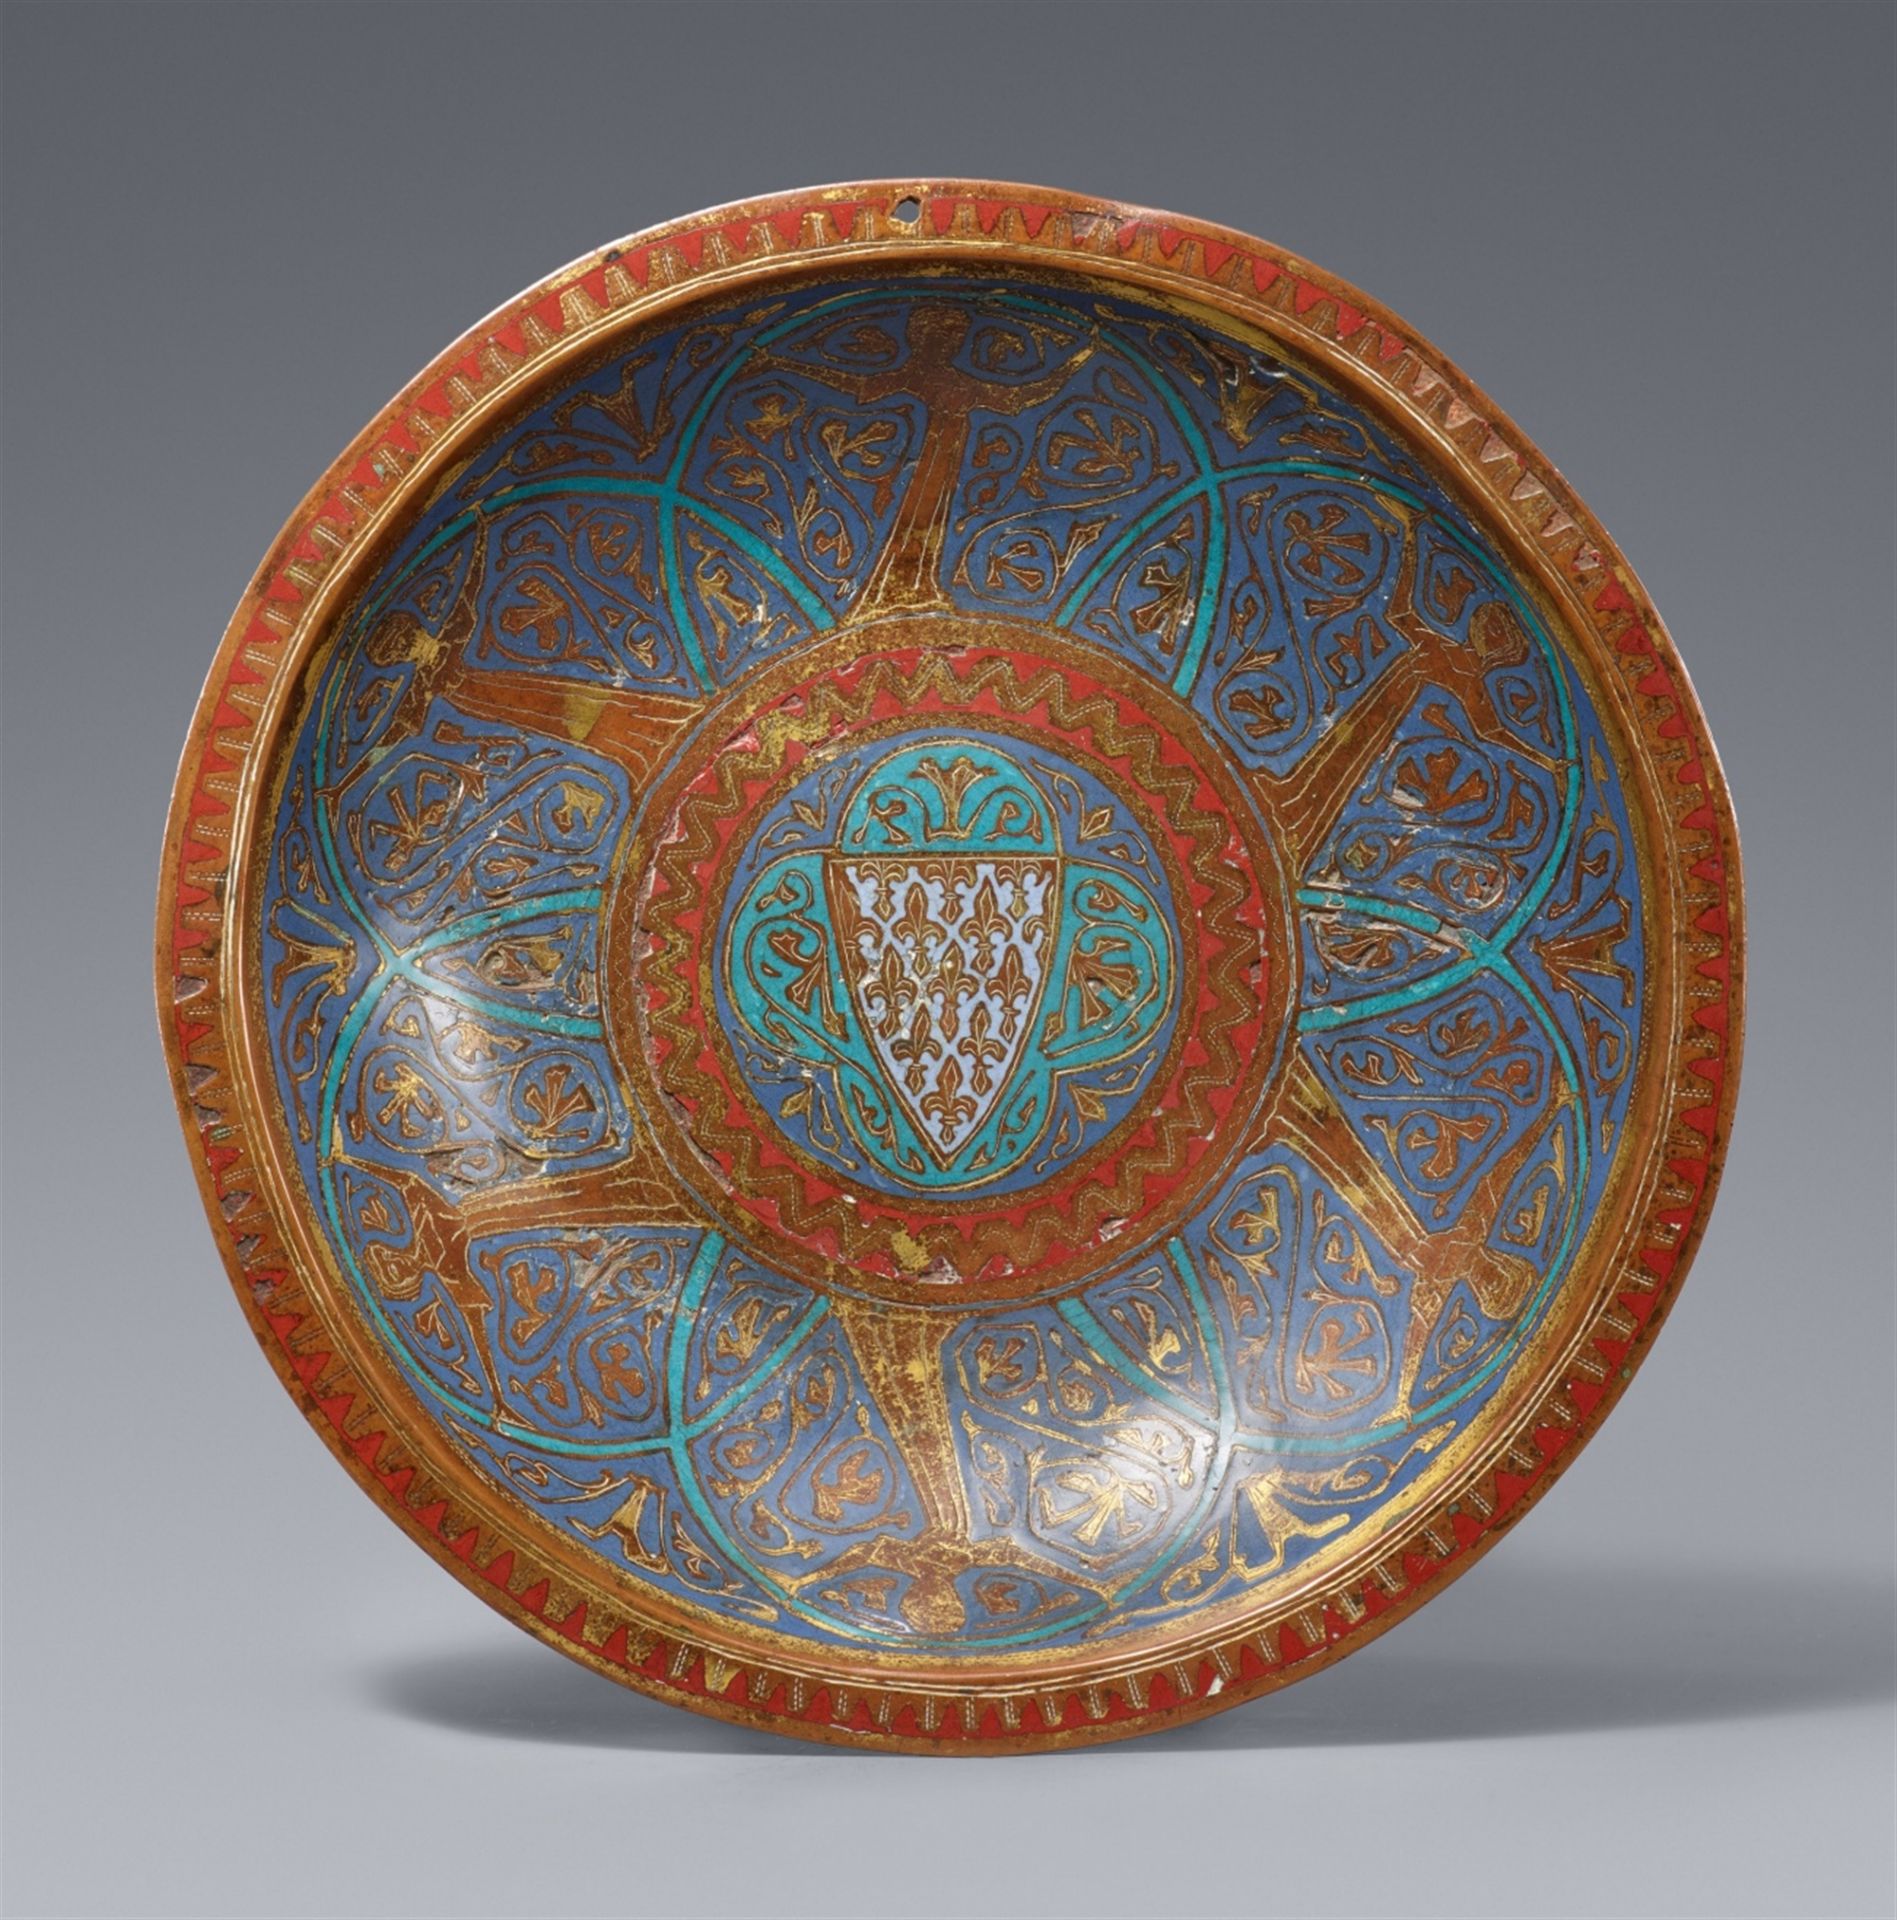 An enamelled bronze dish with the French coat-of-arms